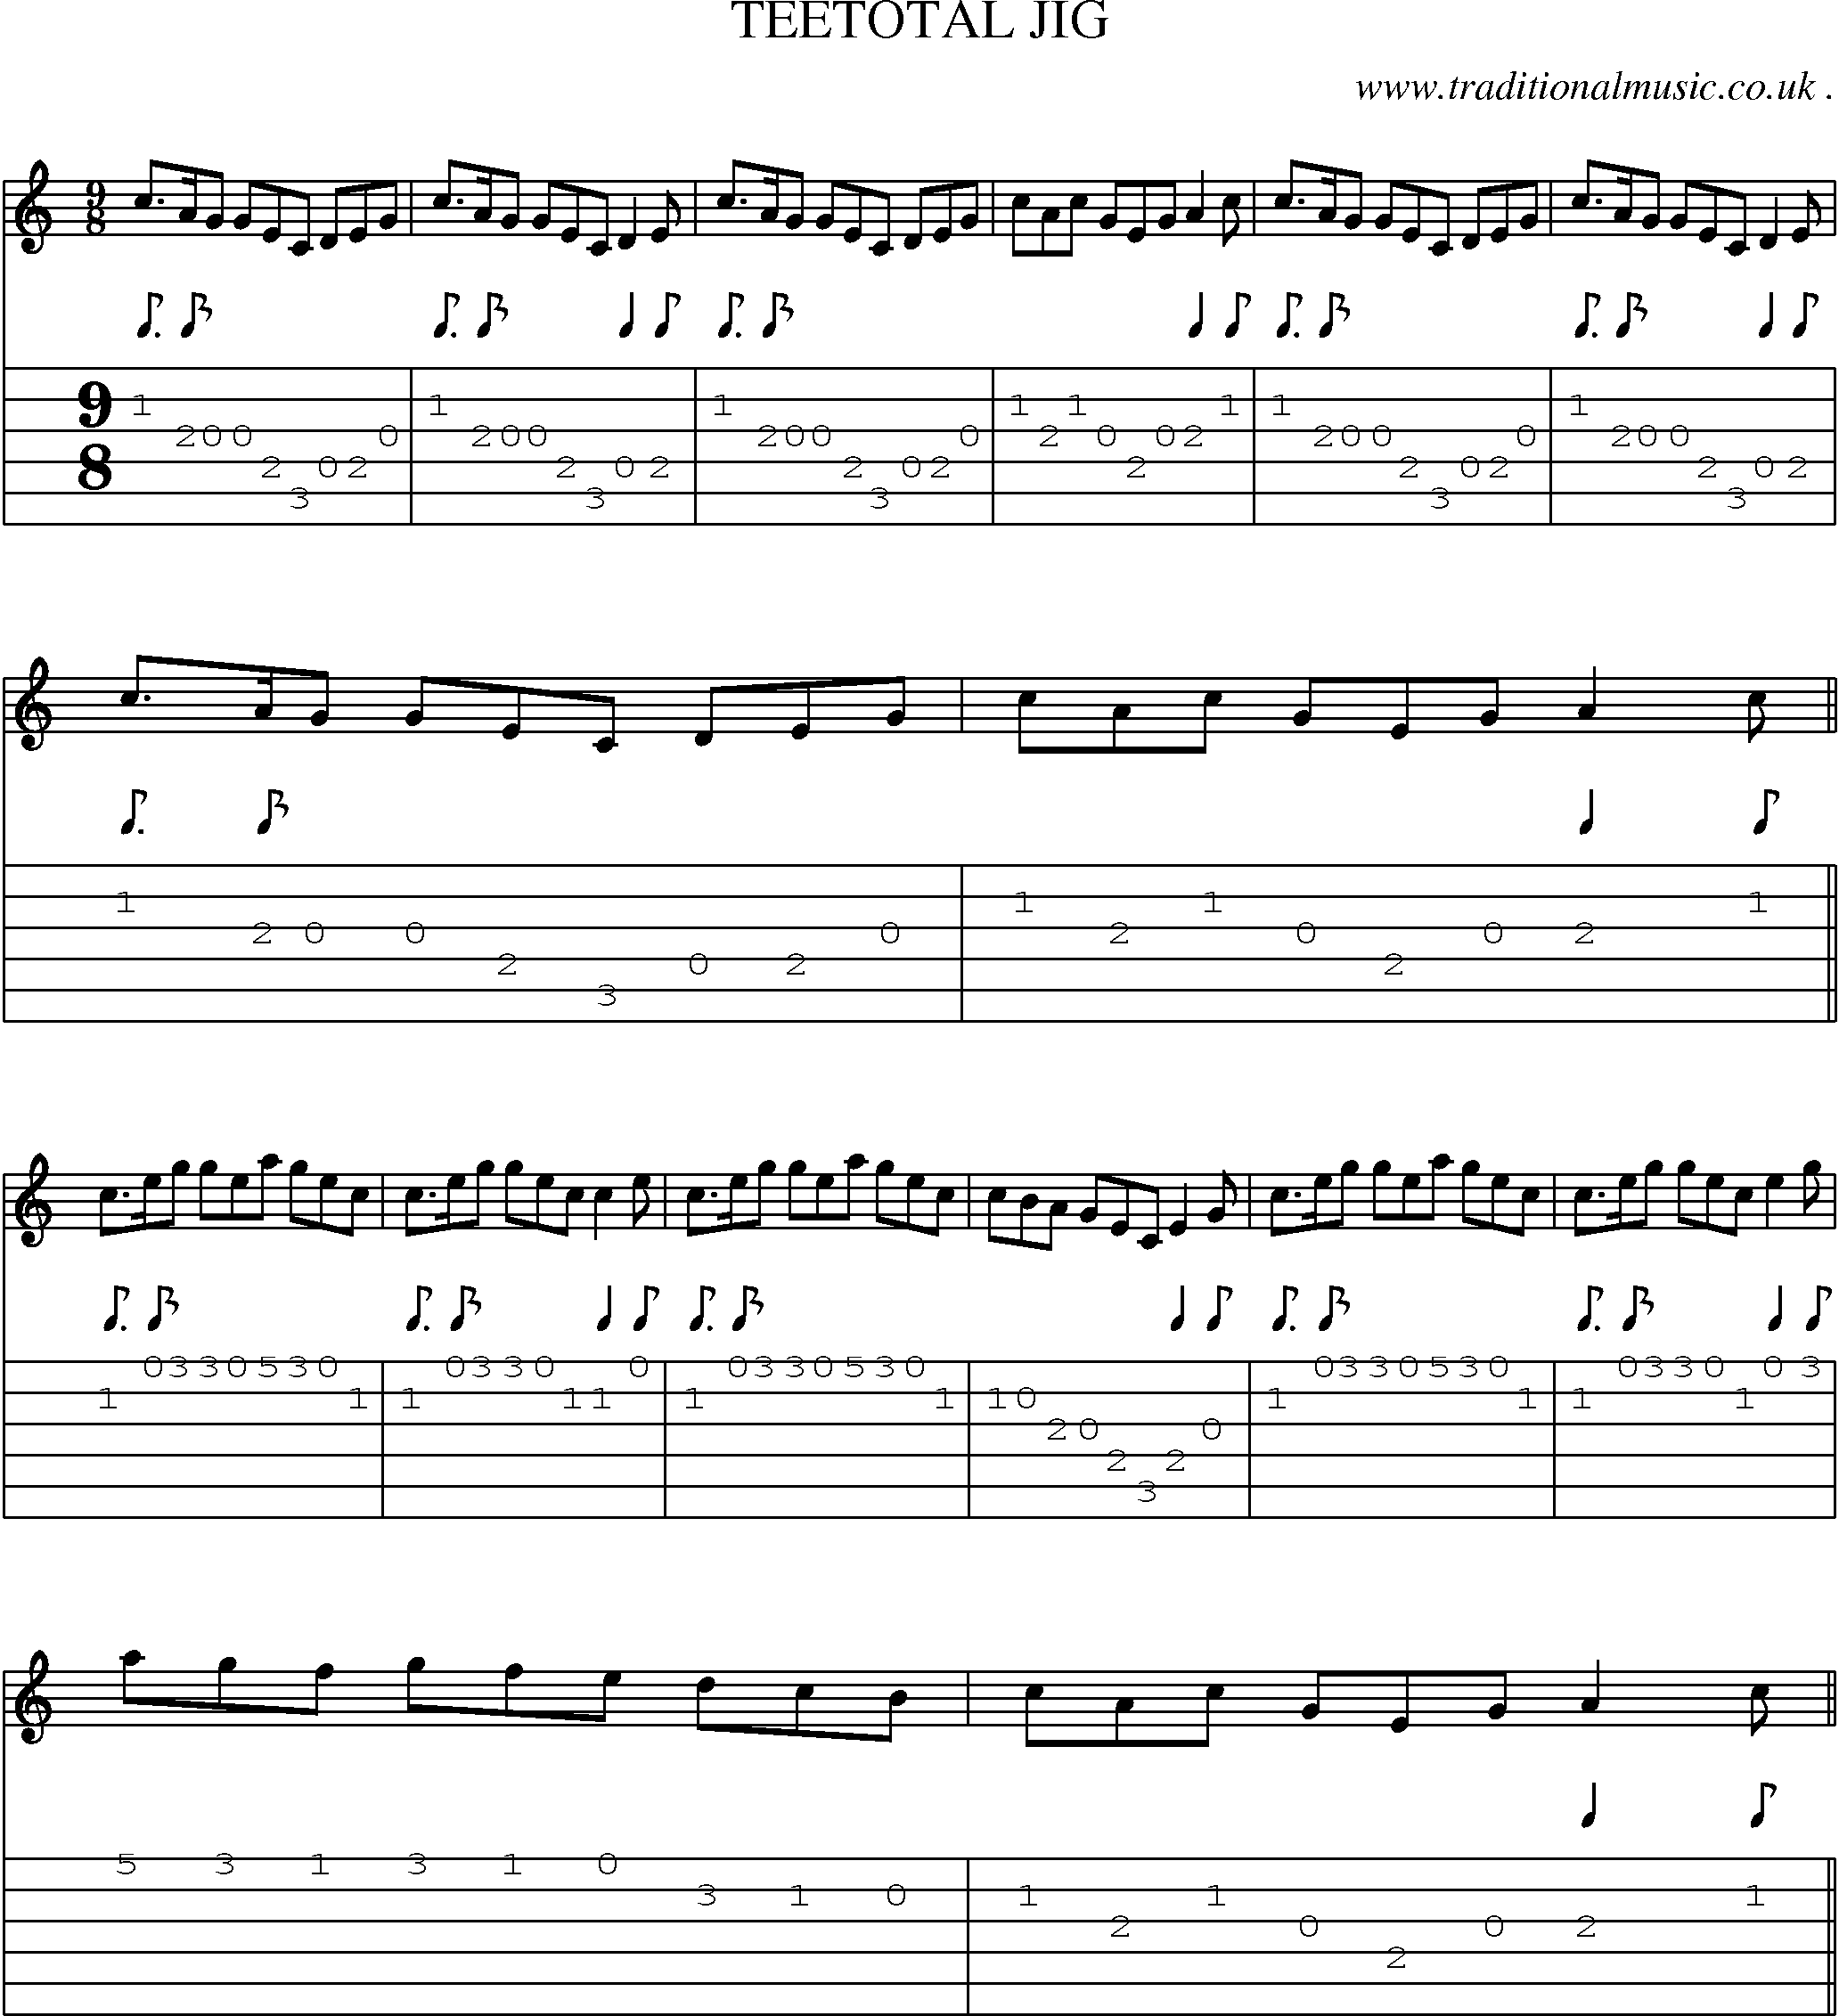 Sheet-Music and Guitar Tabs for Teetotal Jig